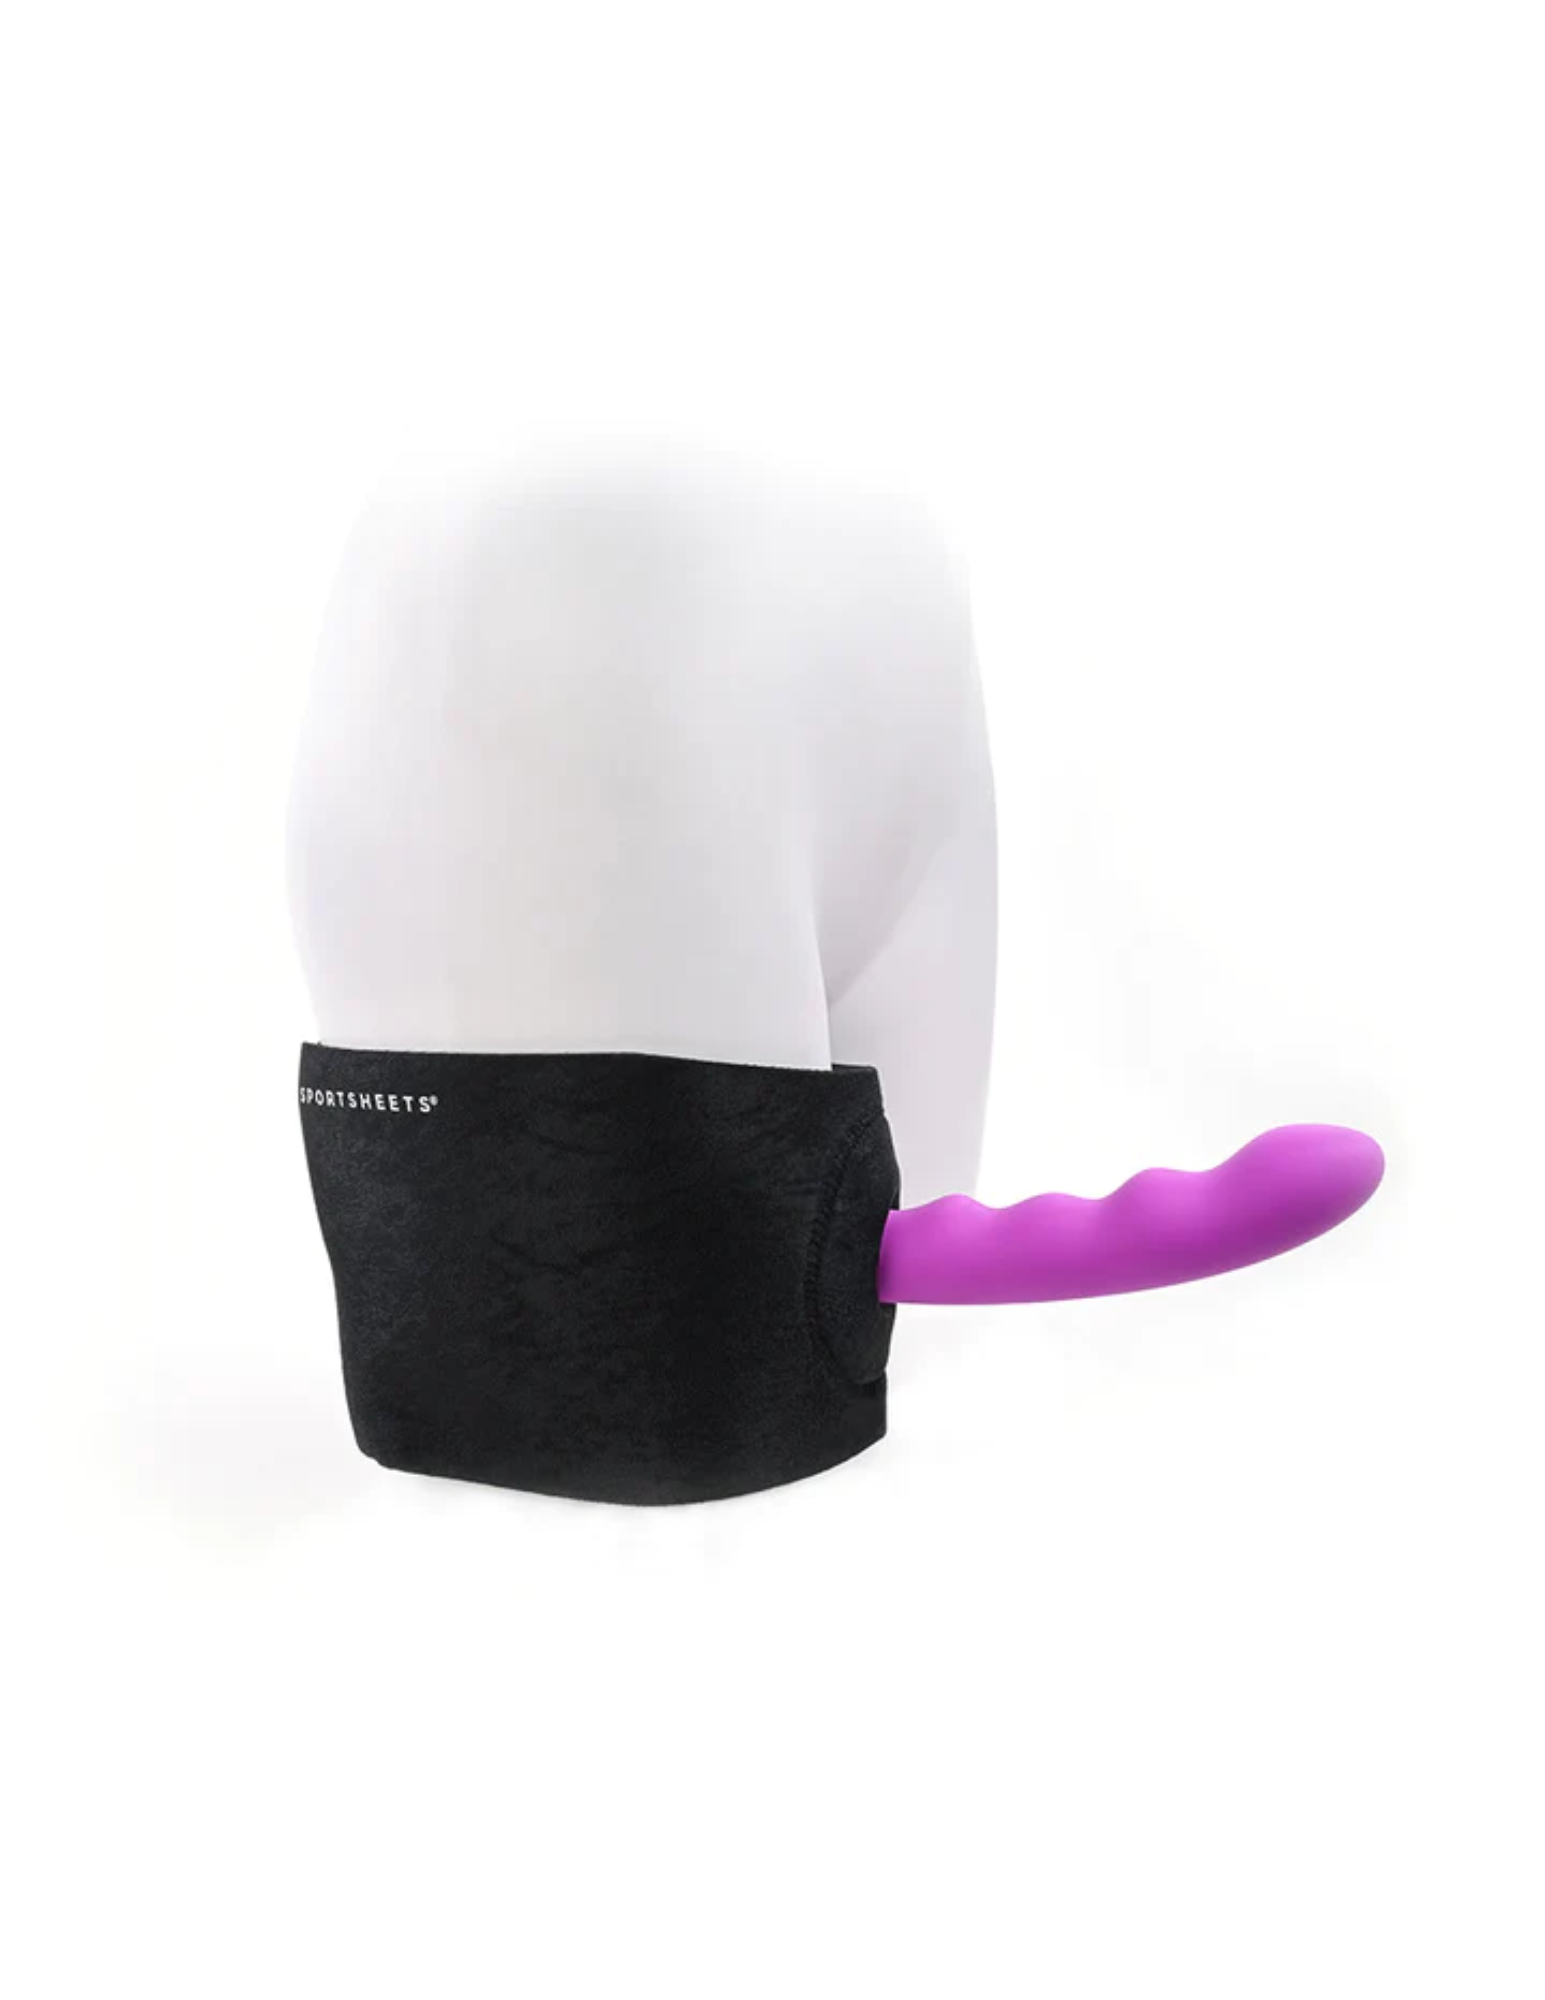 Photo shows a mannequin thigh wearing the Ultra Thigh Adjustable Strap-On from Sportsheets harness with a purple dildo (not included in the set).